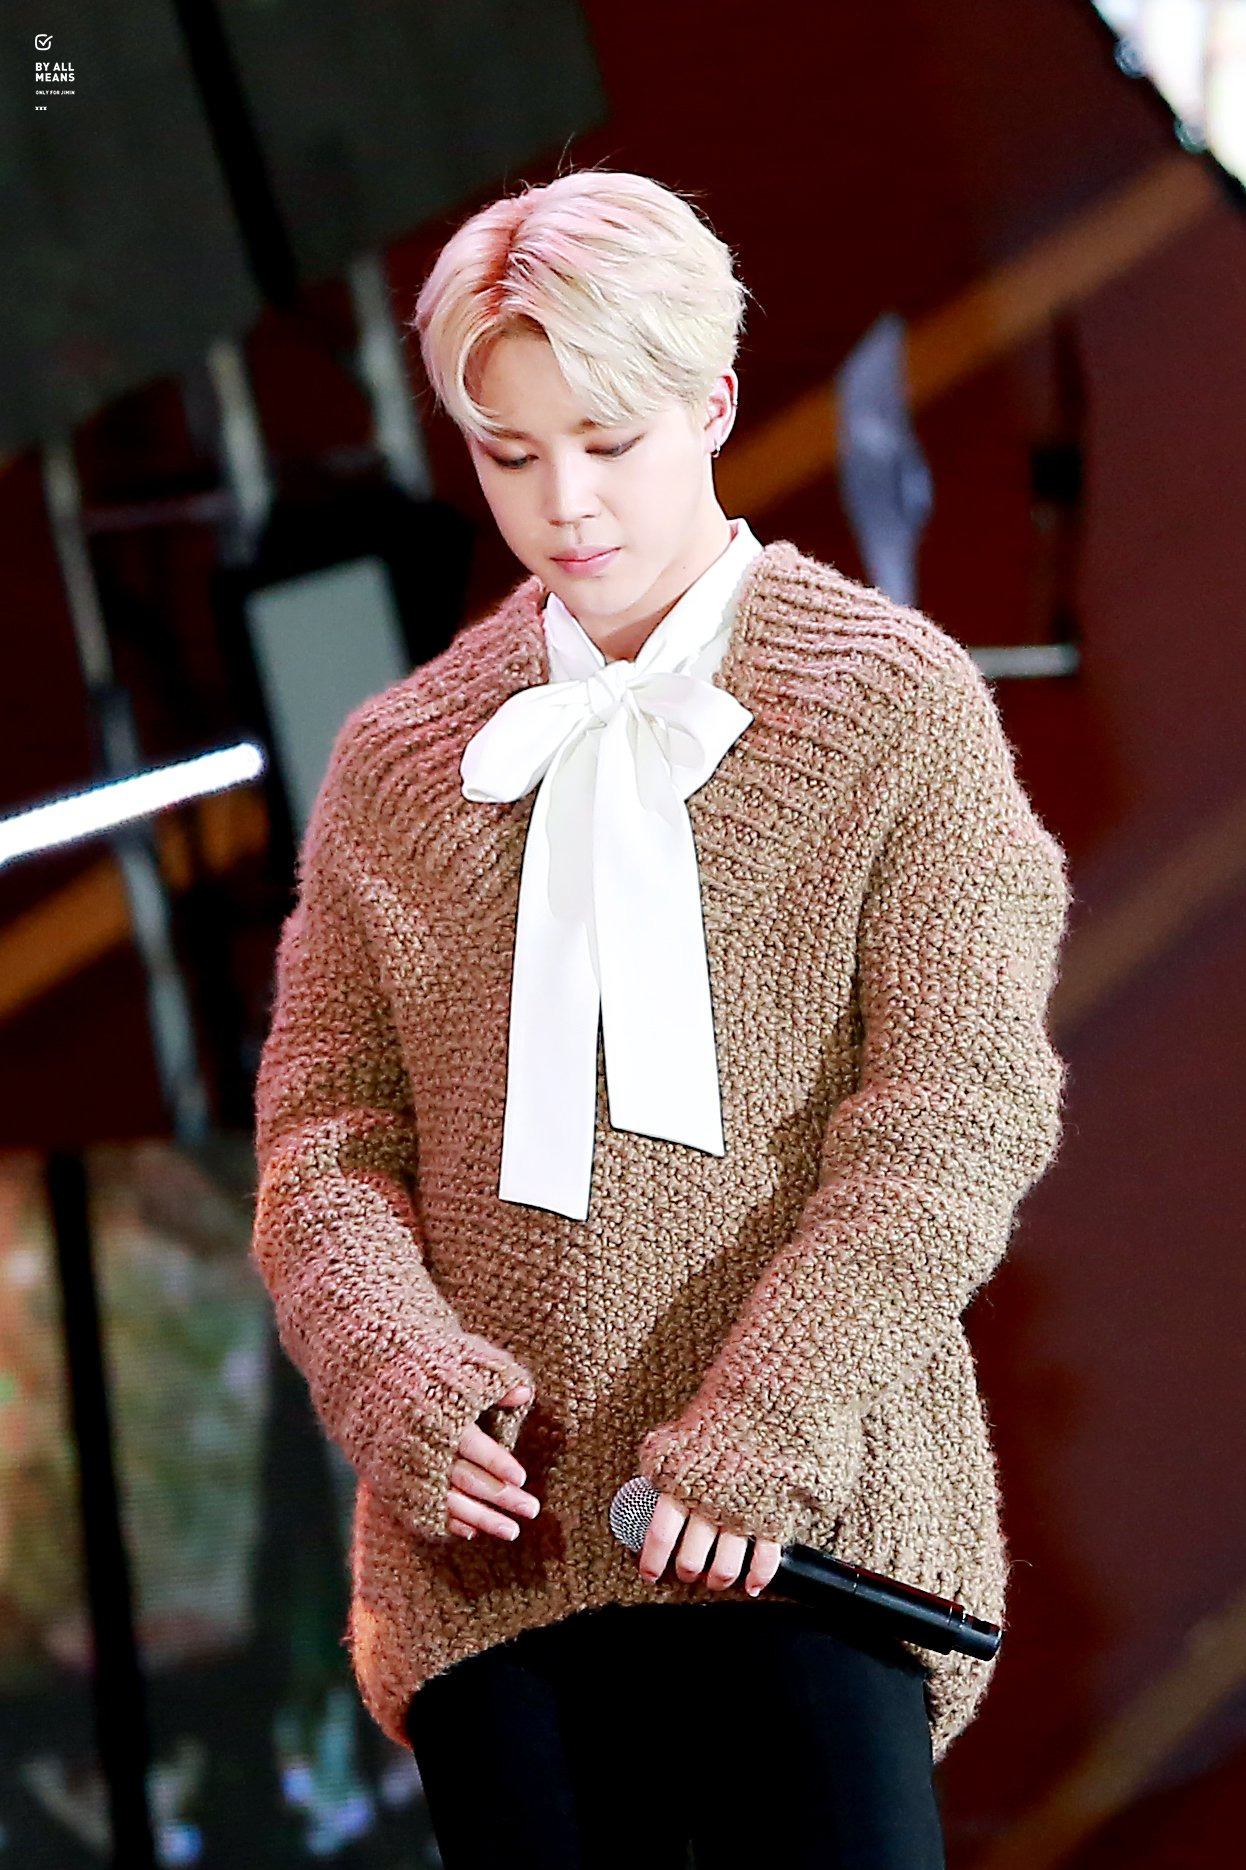 BTS' Jimin Looks Like An Angel In HIs Over-Sized Sweater 